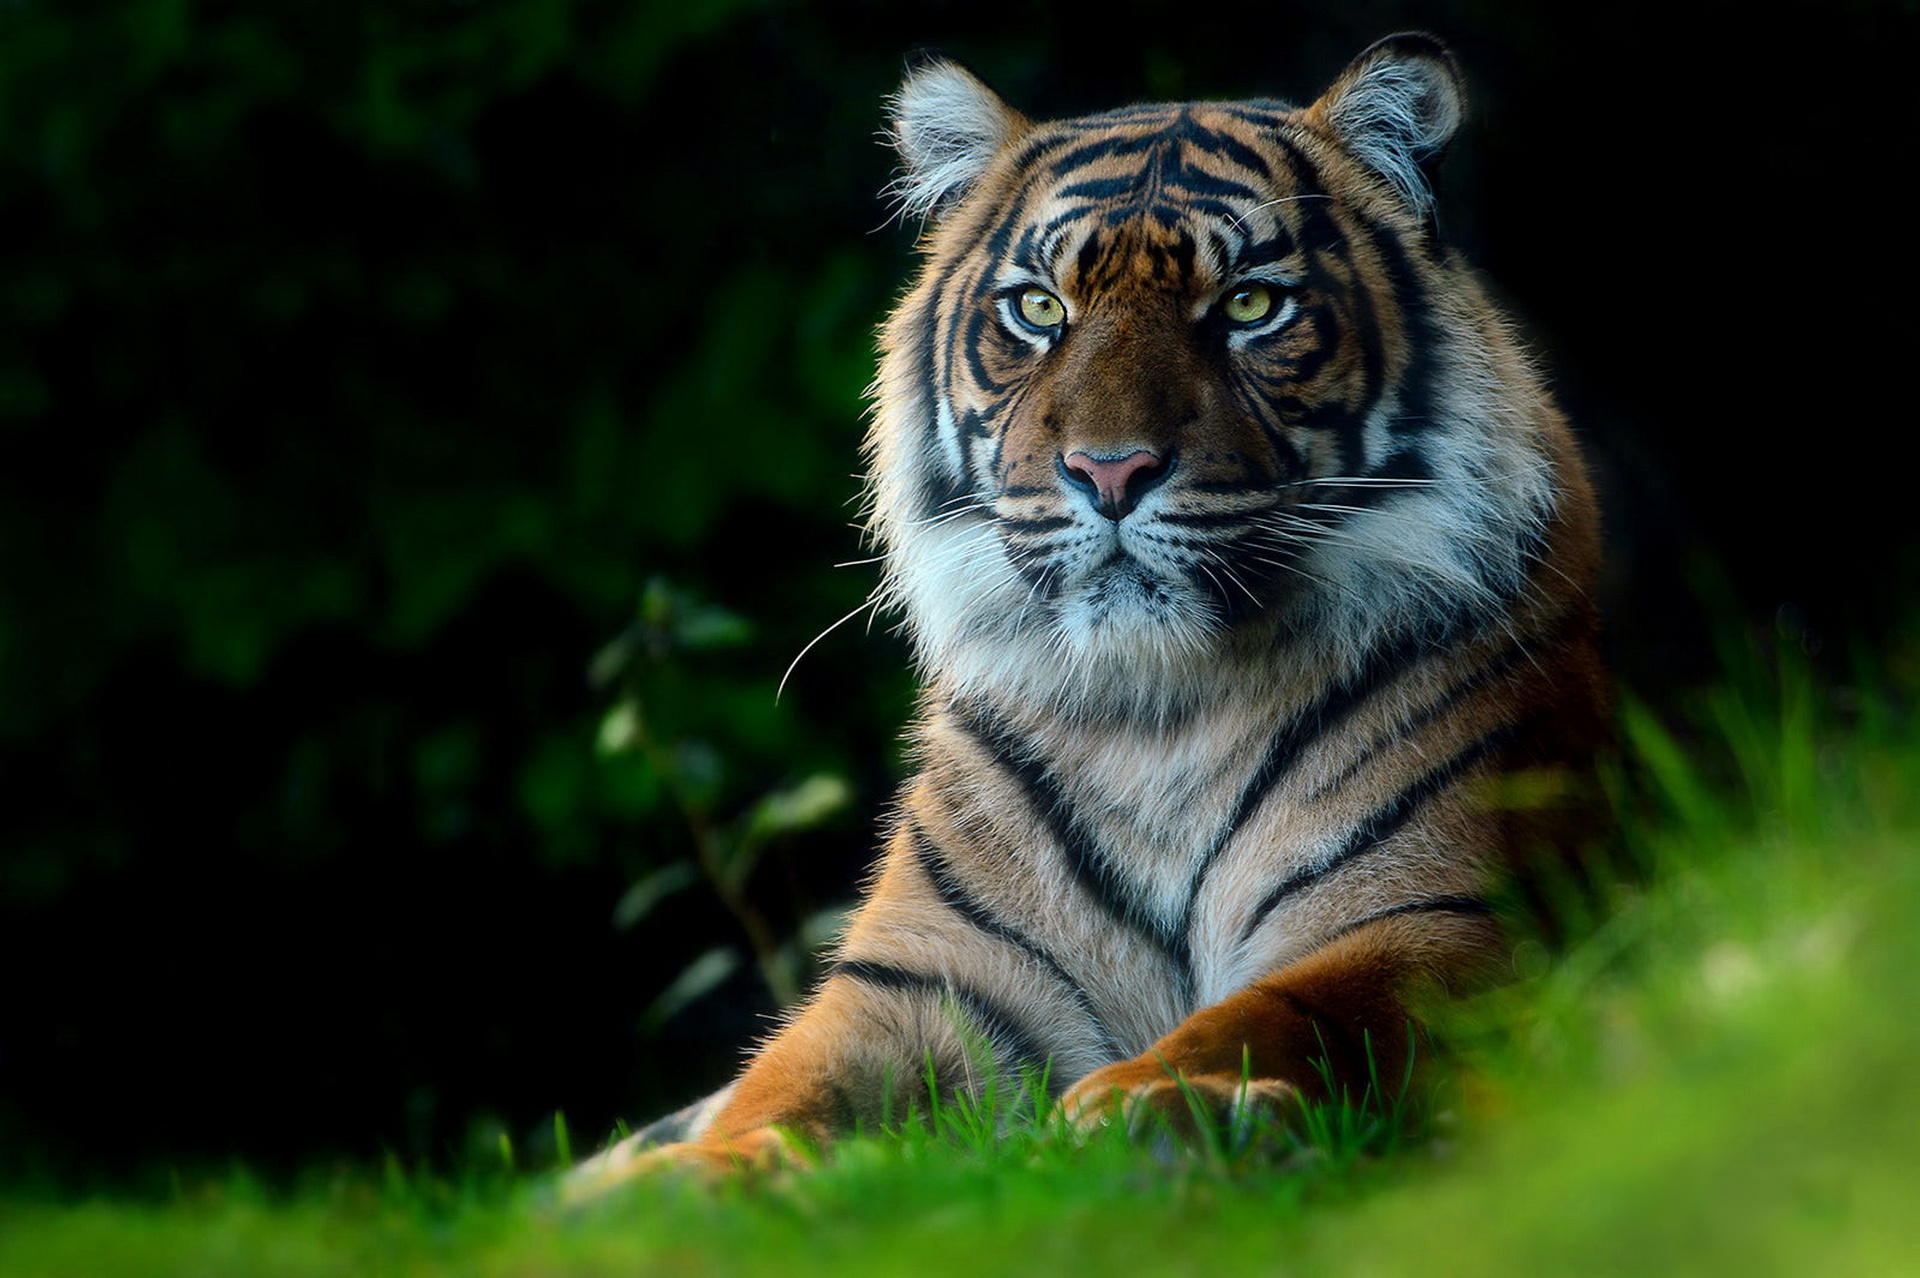 The Images Of Tiger Hd Is In Black And White Format Background, Black And  White Tiger Picture Background Image And Wallpaper for Free Download